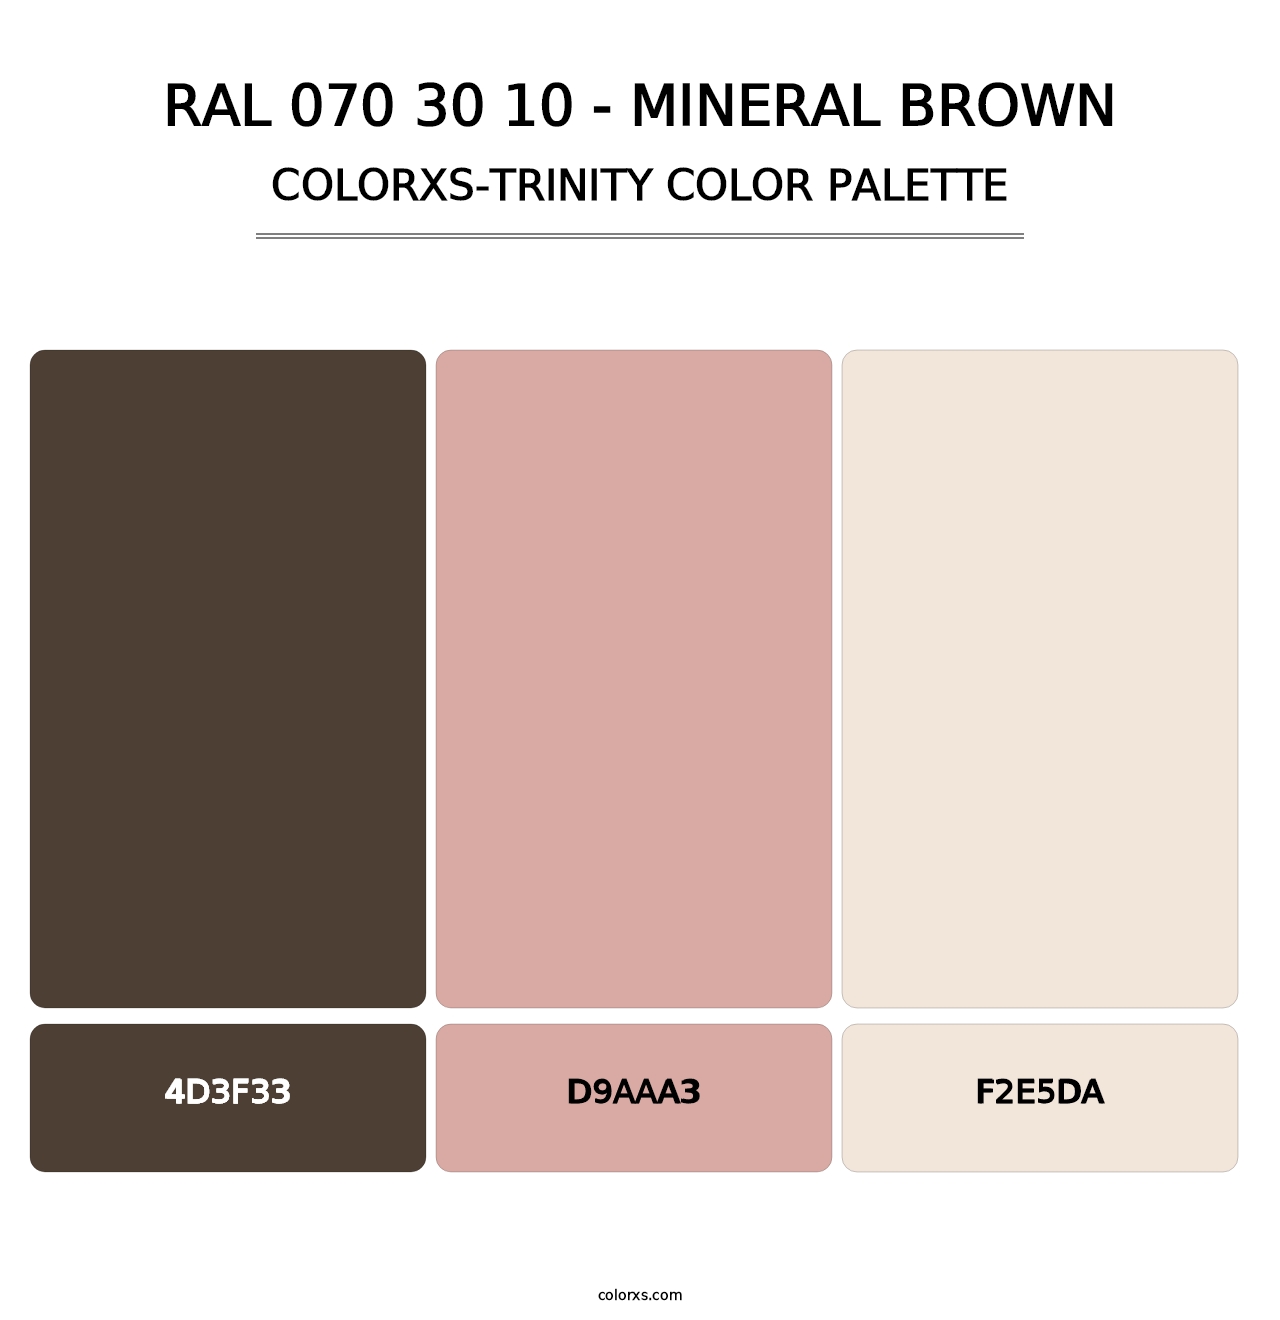 RAL 070 30 10 - Mineral Brown - Colorxs Trinity Palette